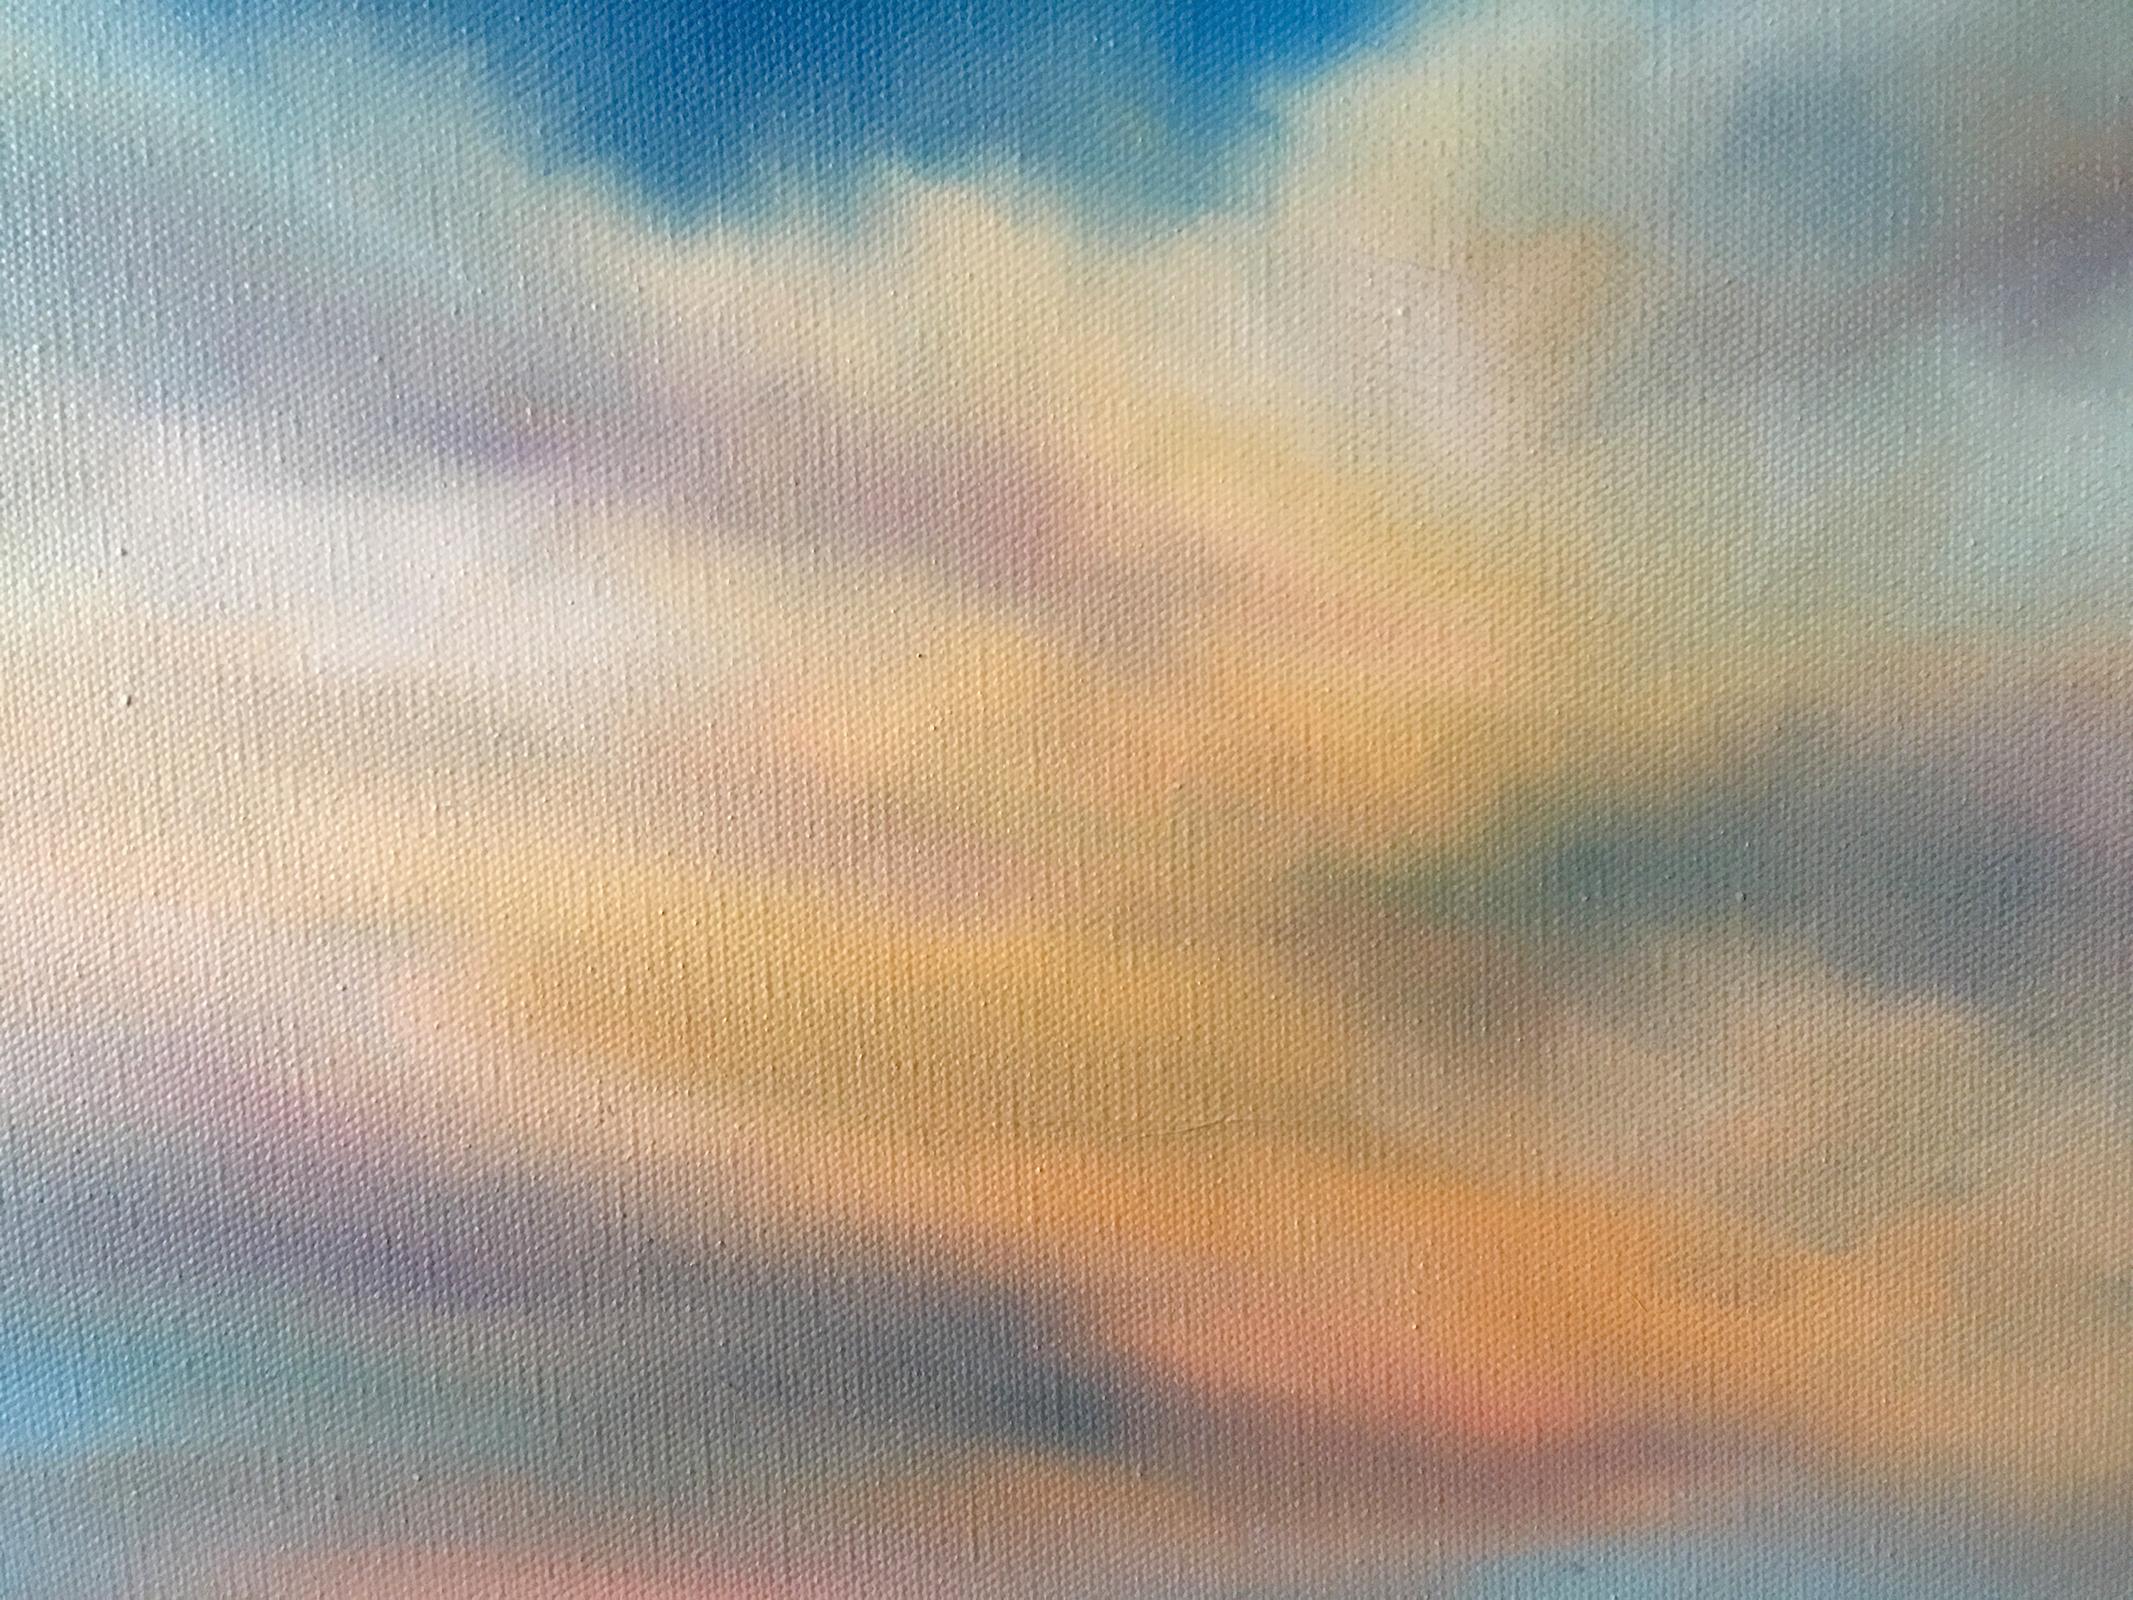 <p>Artist Comments<br>In my imagined seascape a warm colorful light glows in the clouds and on the water. I enjoy the freedom of letting the paint tell me where it wants to go and allowing the process to unfold spontaneously.</p><br/><p>About the